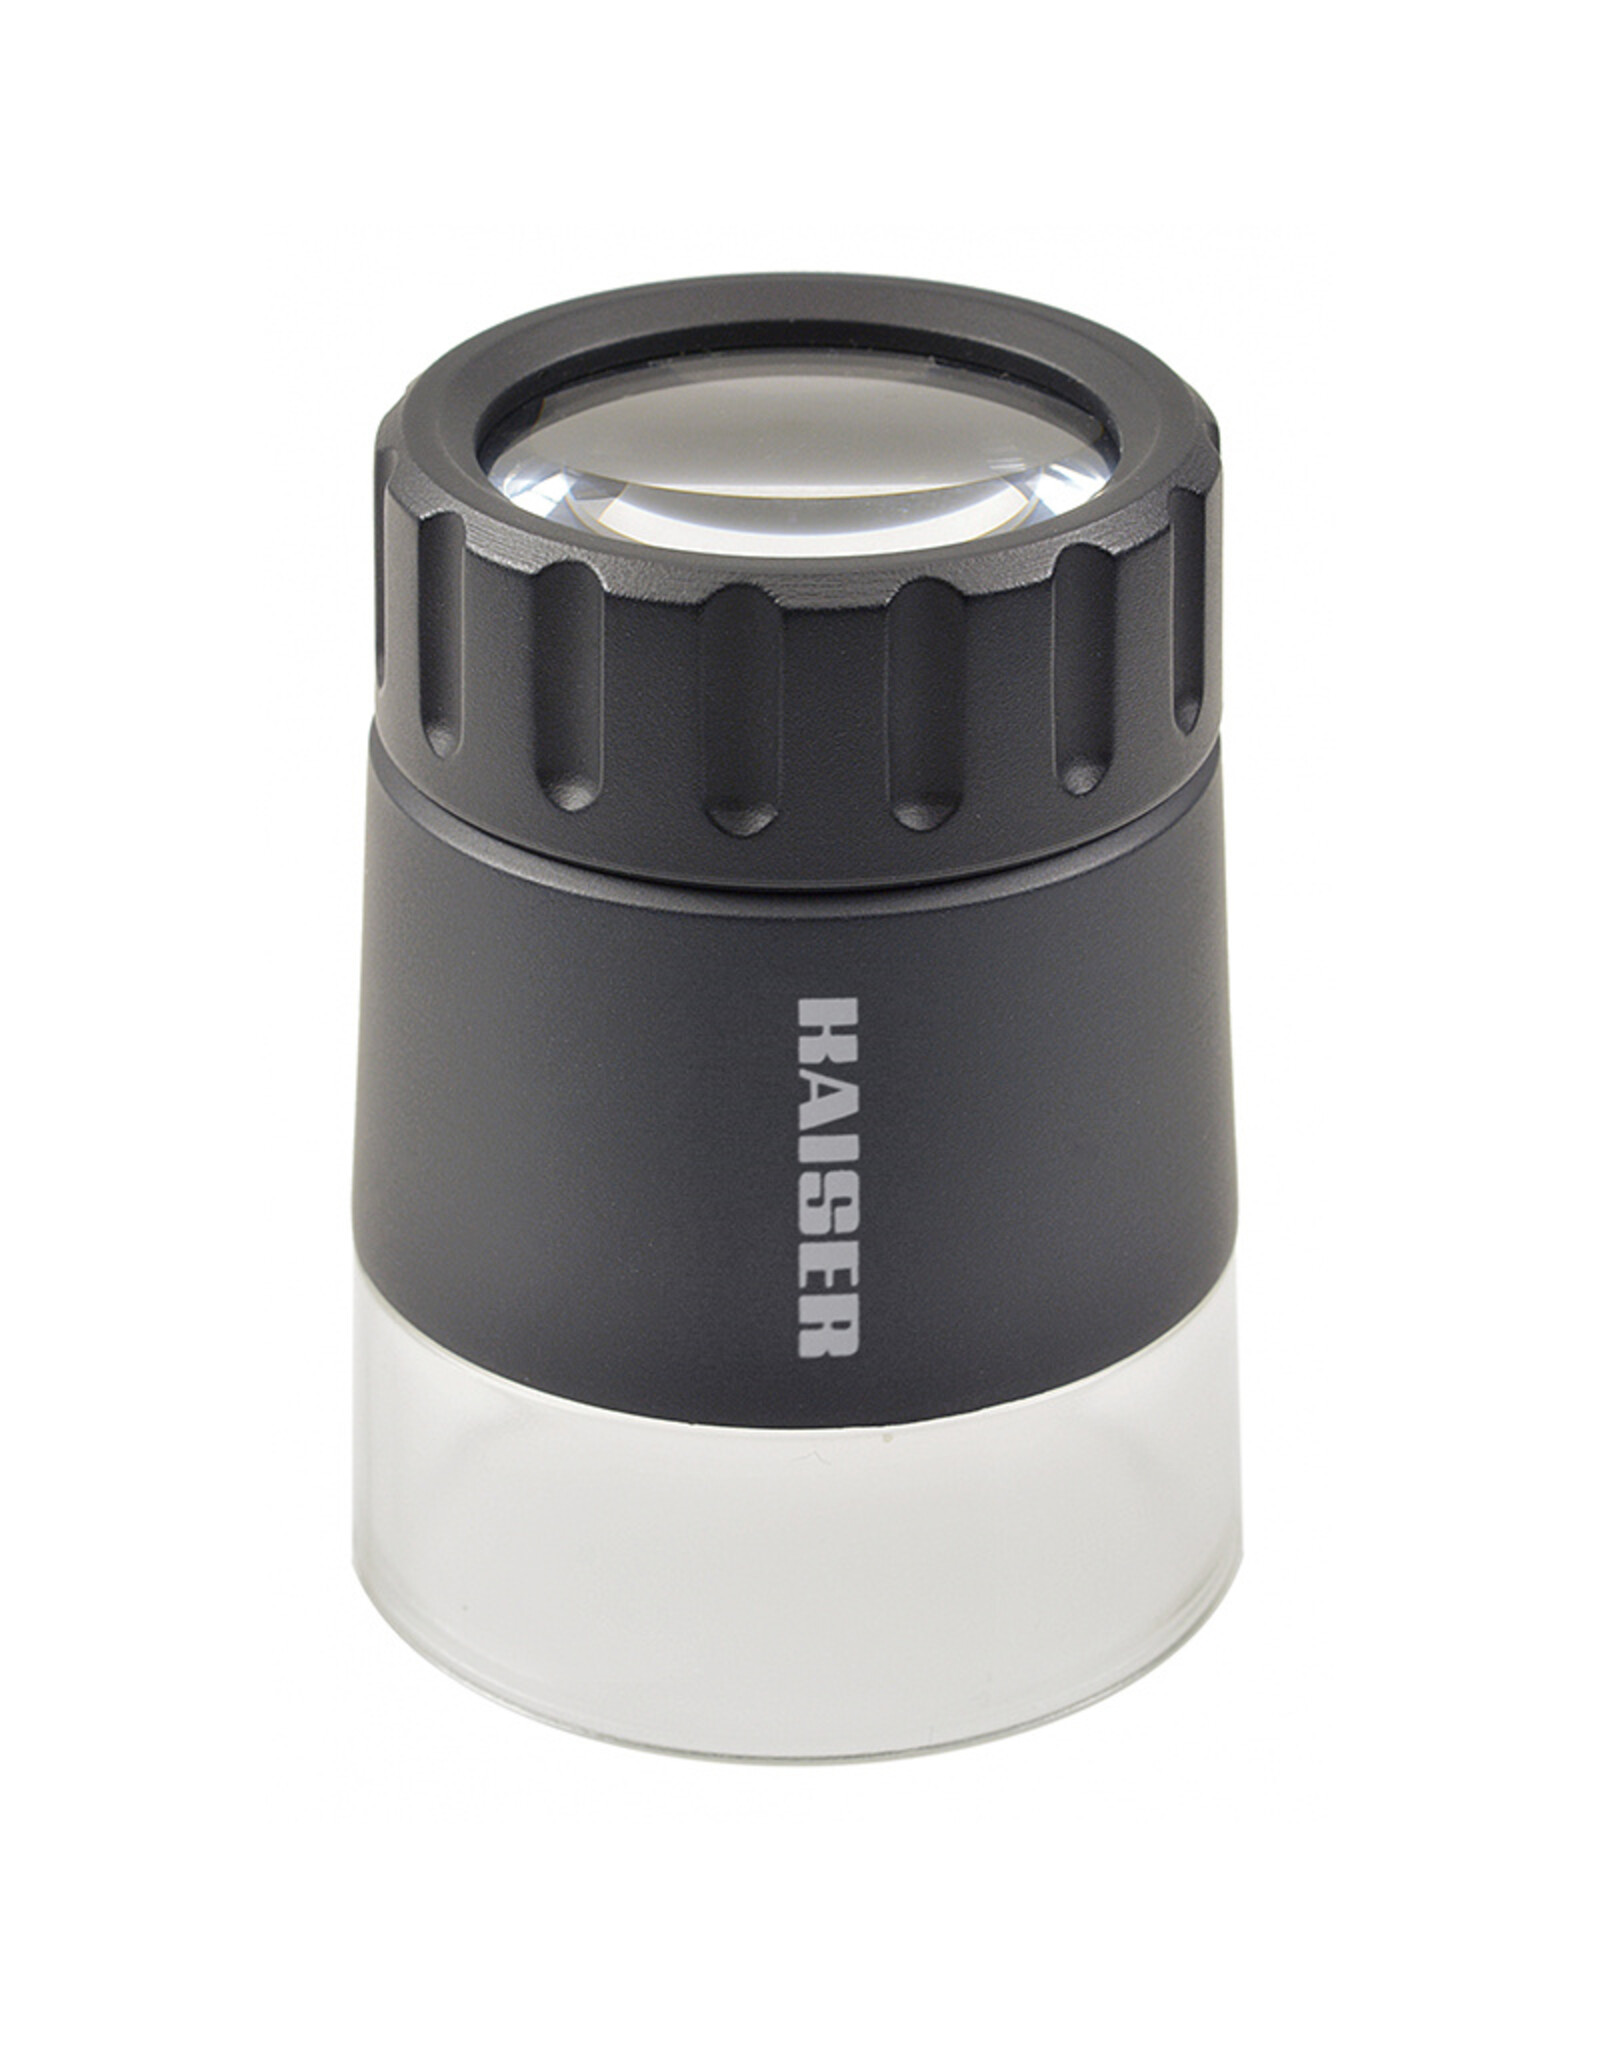 Kaiser Kaiser All-Purpose Magnifier 4.5 x, magnification 4.5 fold, viewing field ø 45 mm suitable for 35 mm slides